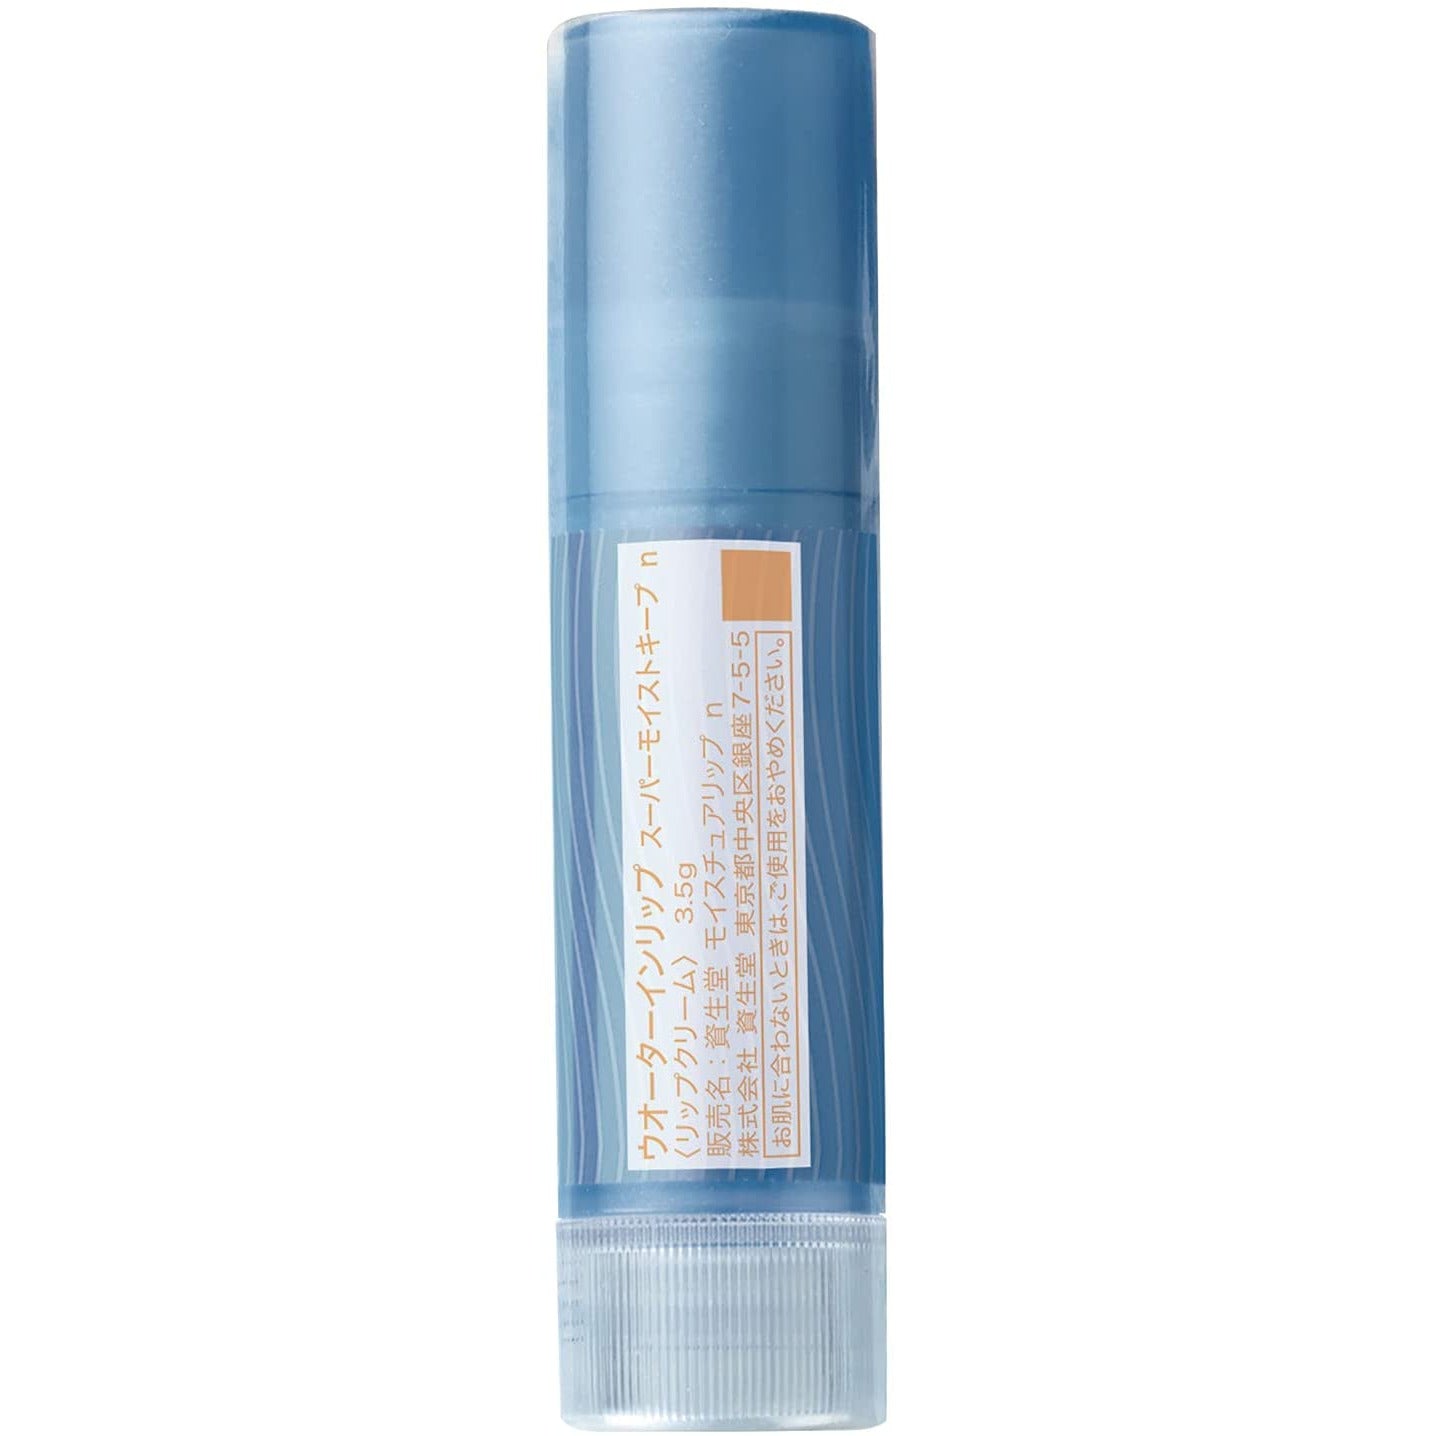 SHISEIDO Water-in-Lip Super Moist Keep SPF12 PA+ 3.5g Transparent and colorless